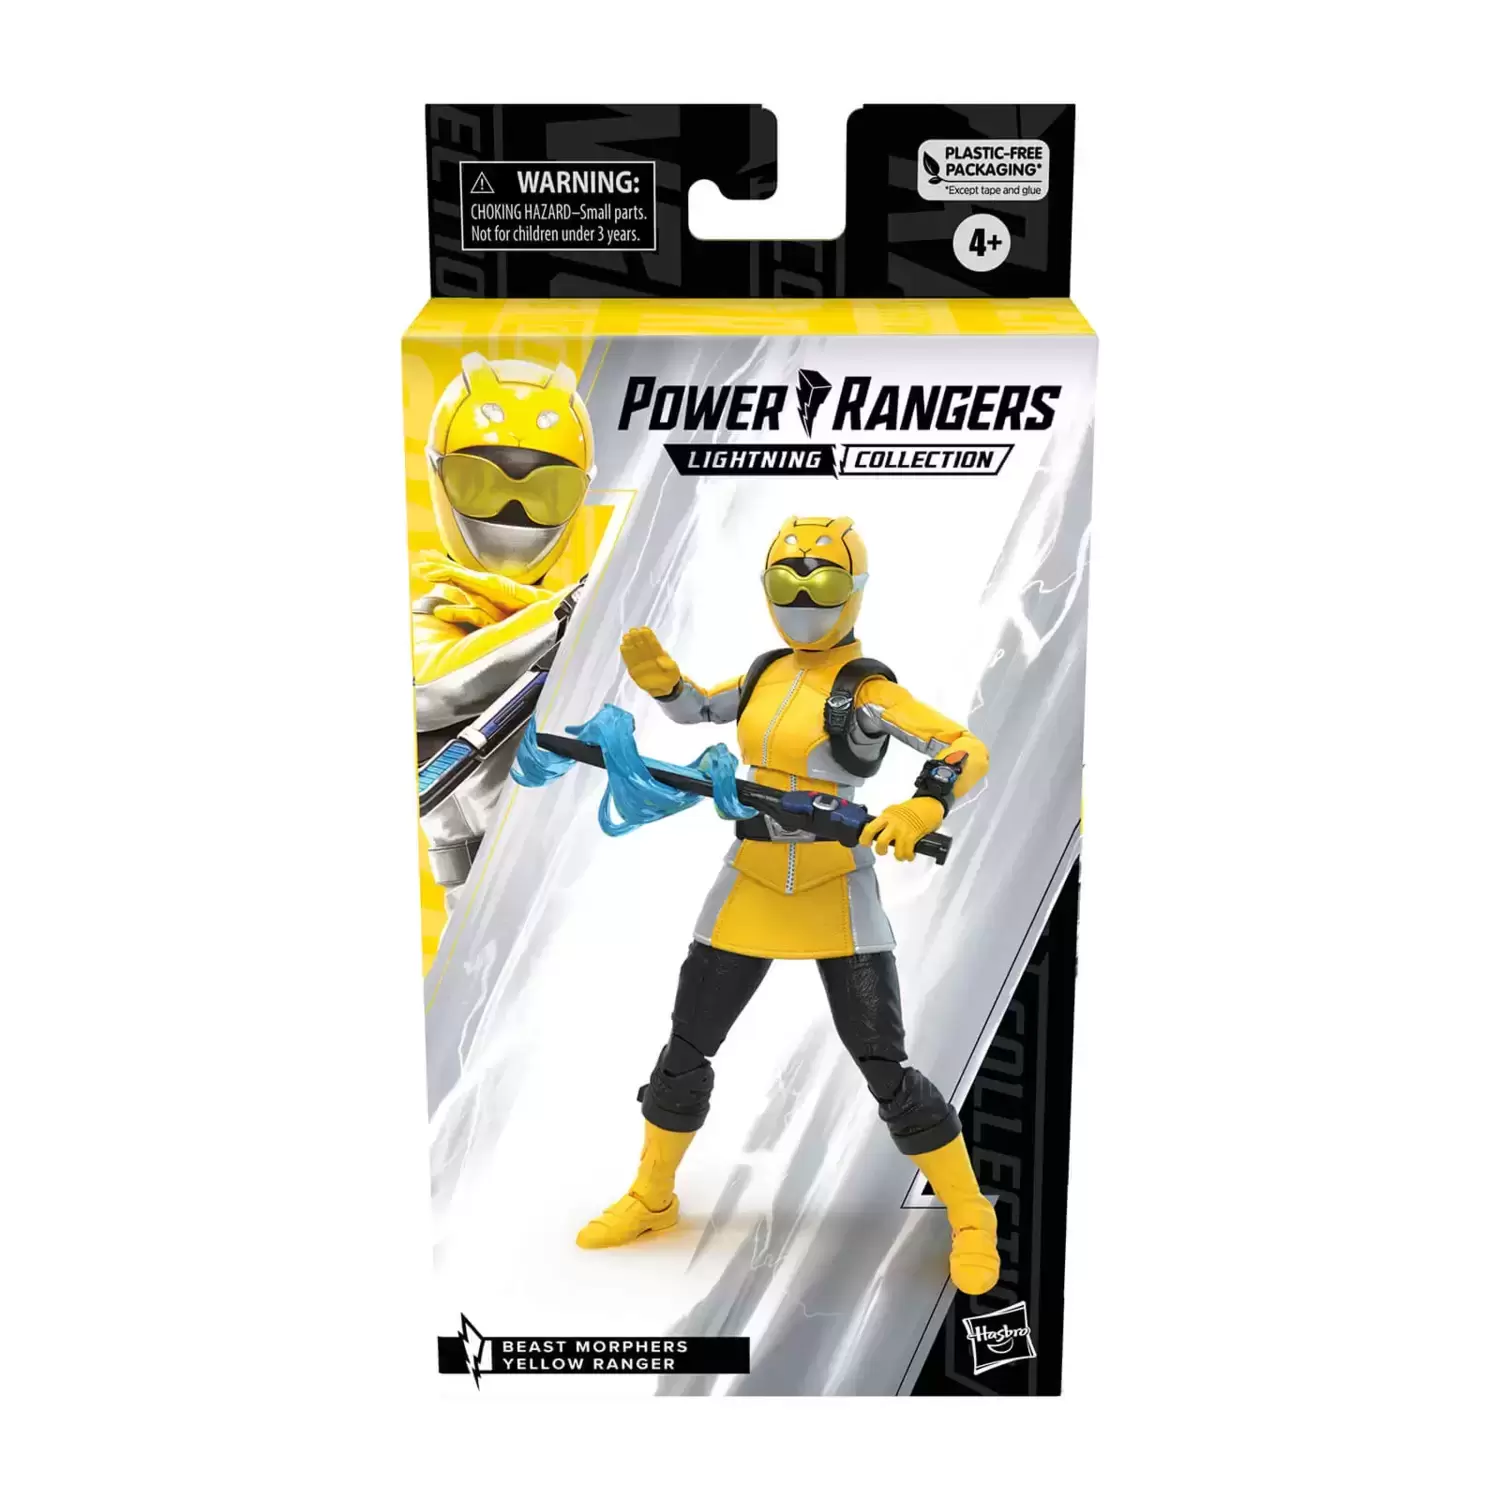 Power Rangers Hasbro - Lightning Collection - Beast Morphers Yellow Ranger (Zoey Reeves)